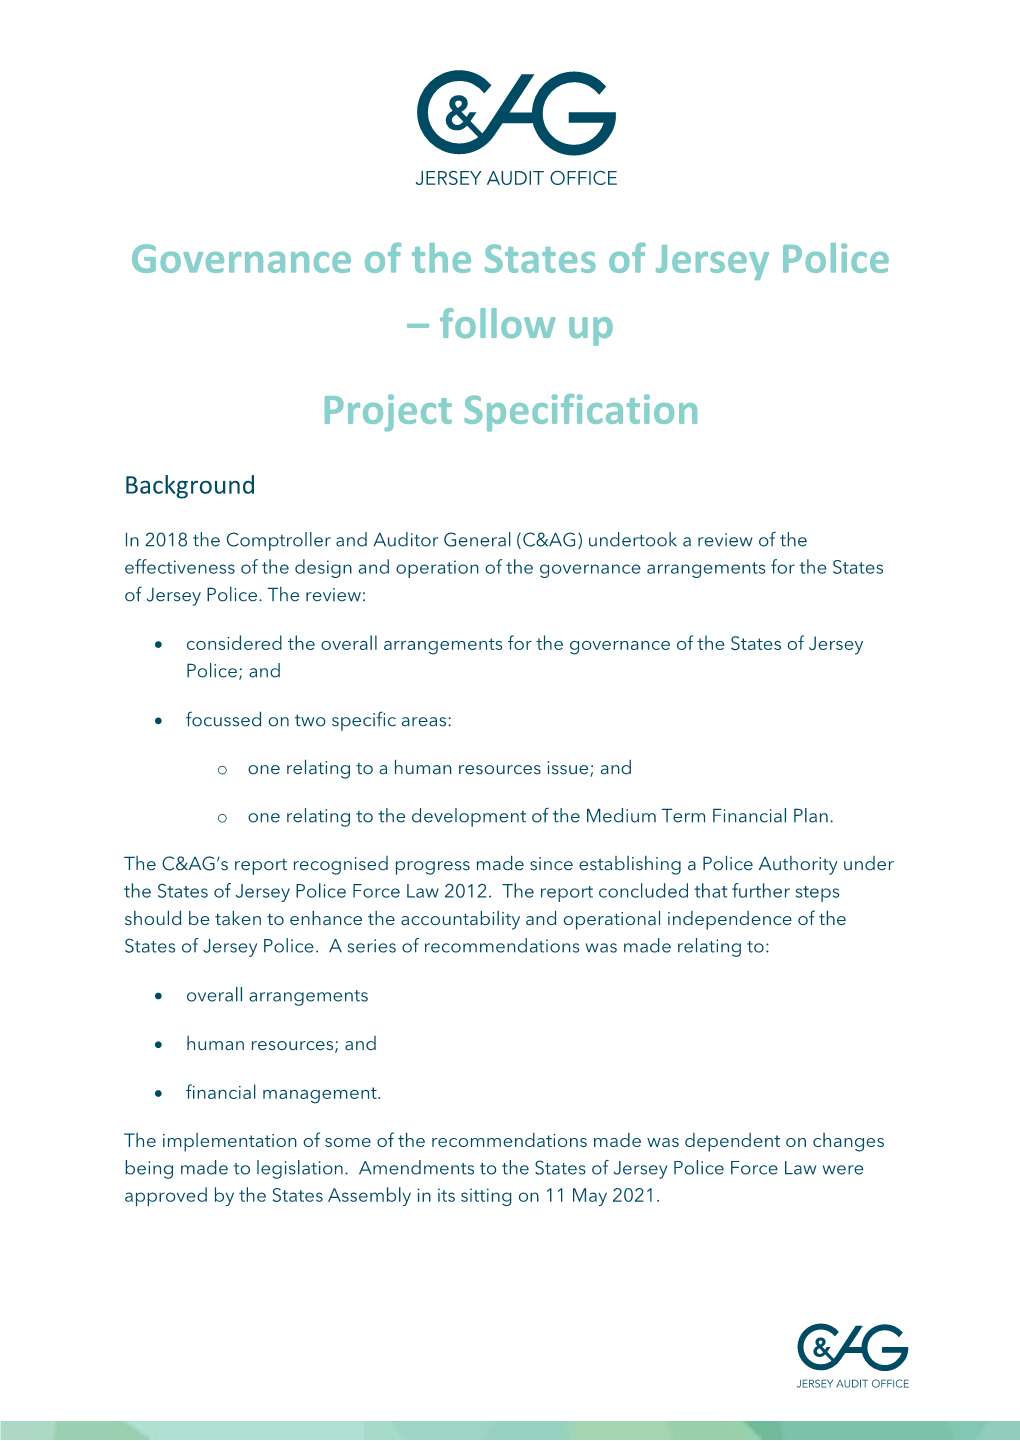 Project Specification – Governance of States Police Follow Up